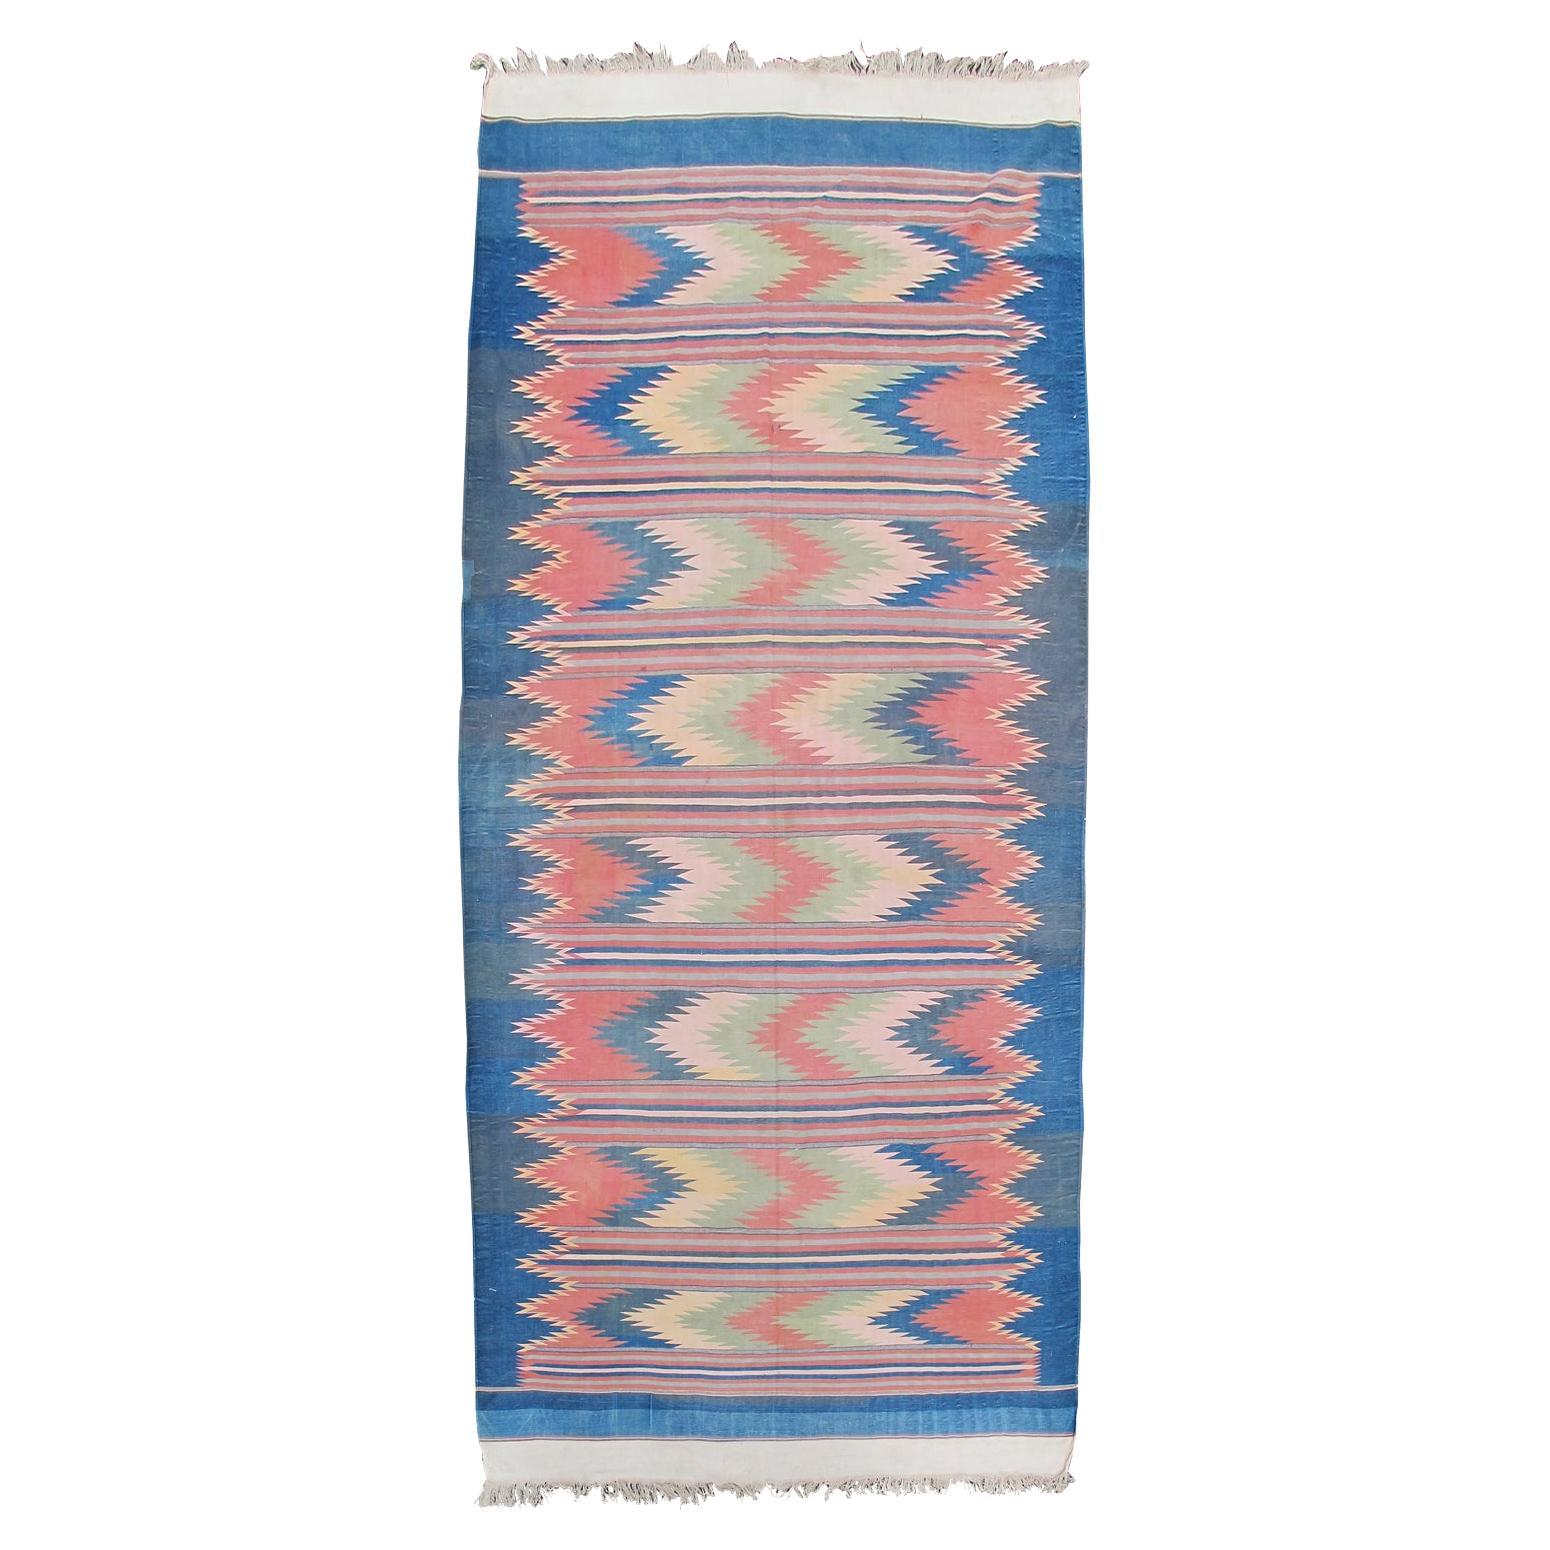 Antique Indian Dhurrie Rug, Early 20th Century